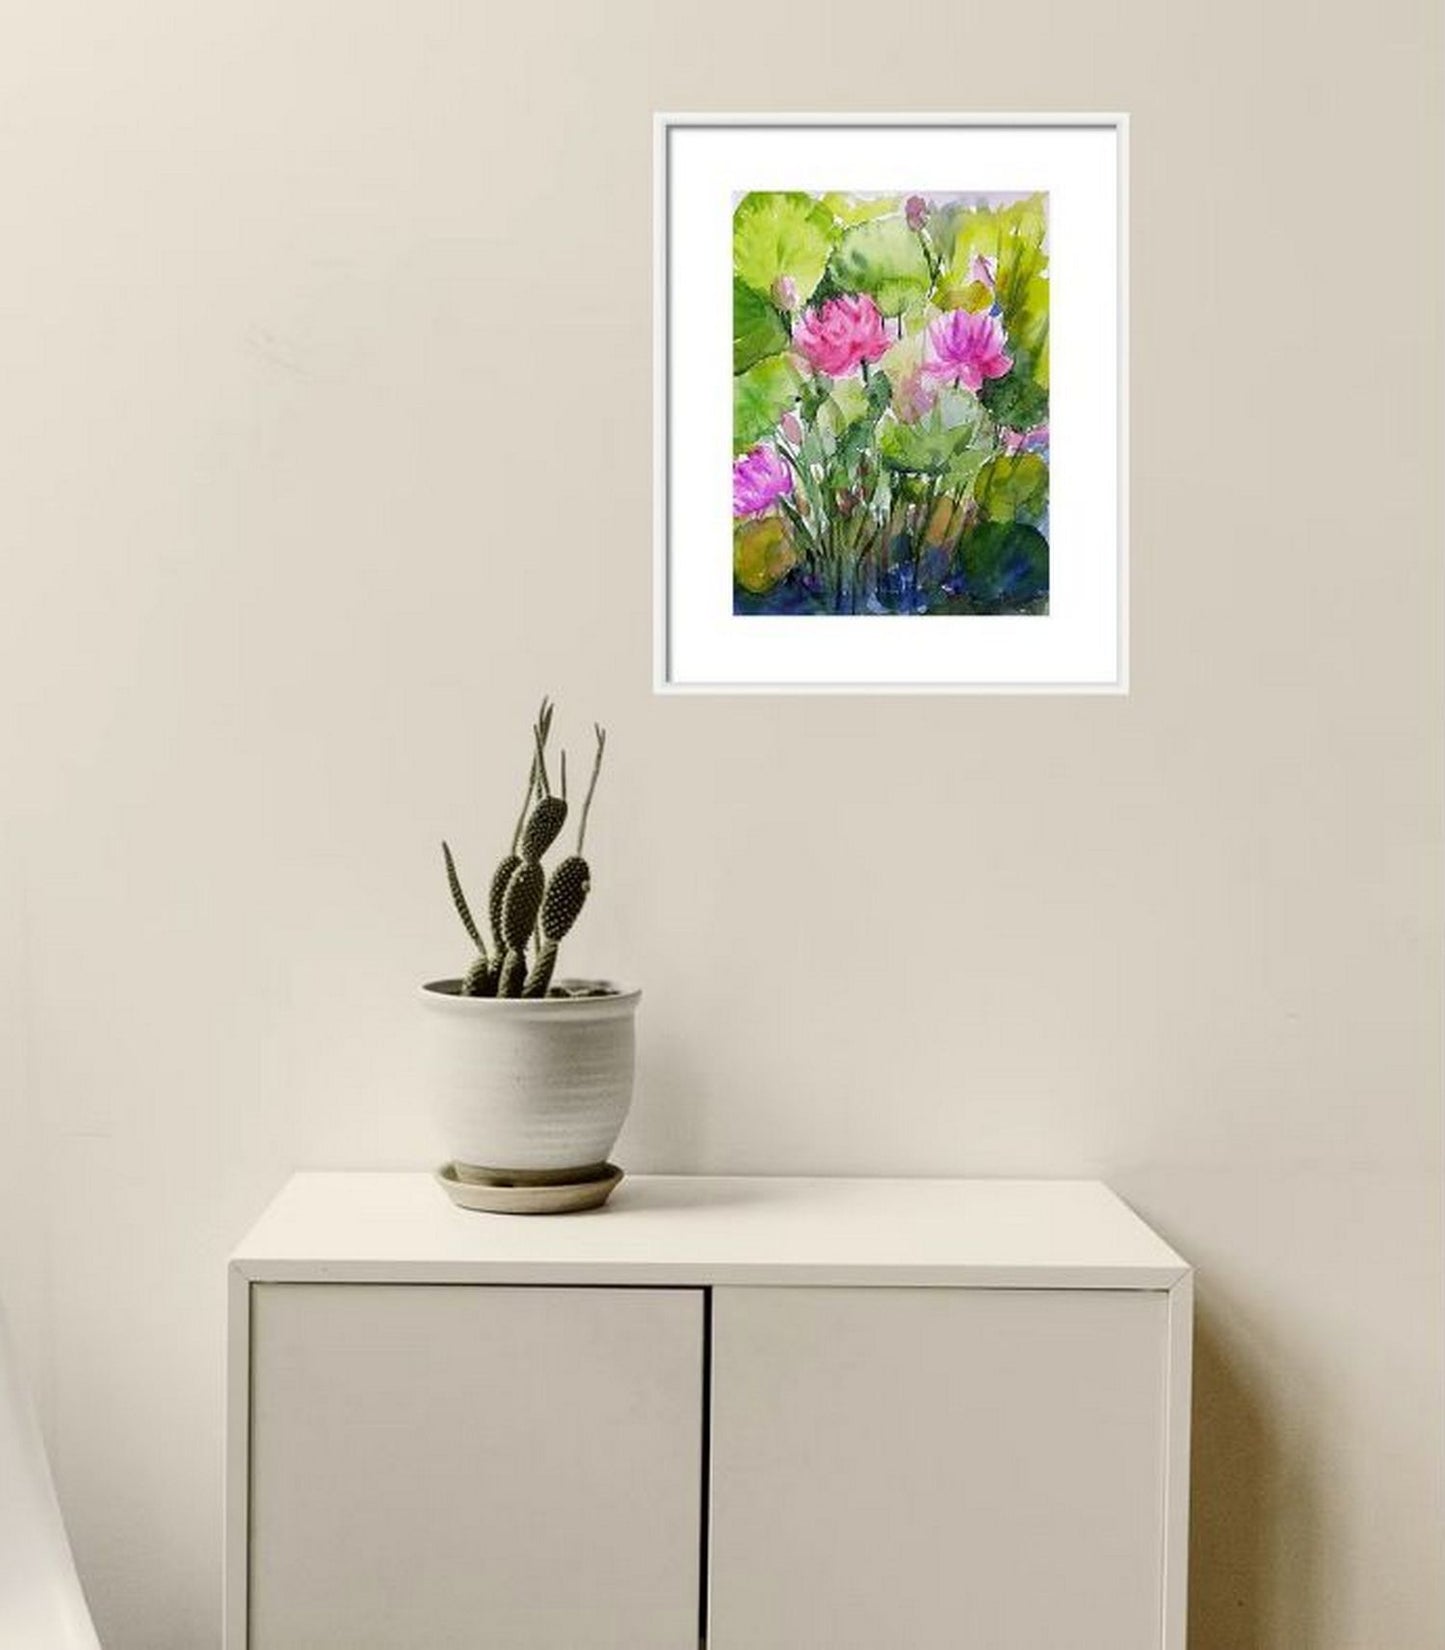 A Pink Lotus Pond, watercolor art in a virtual frame in a virtual setting